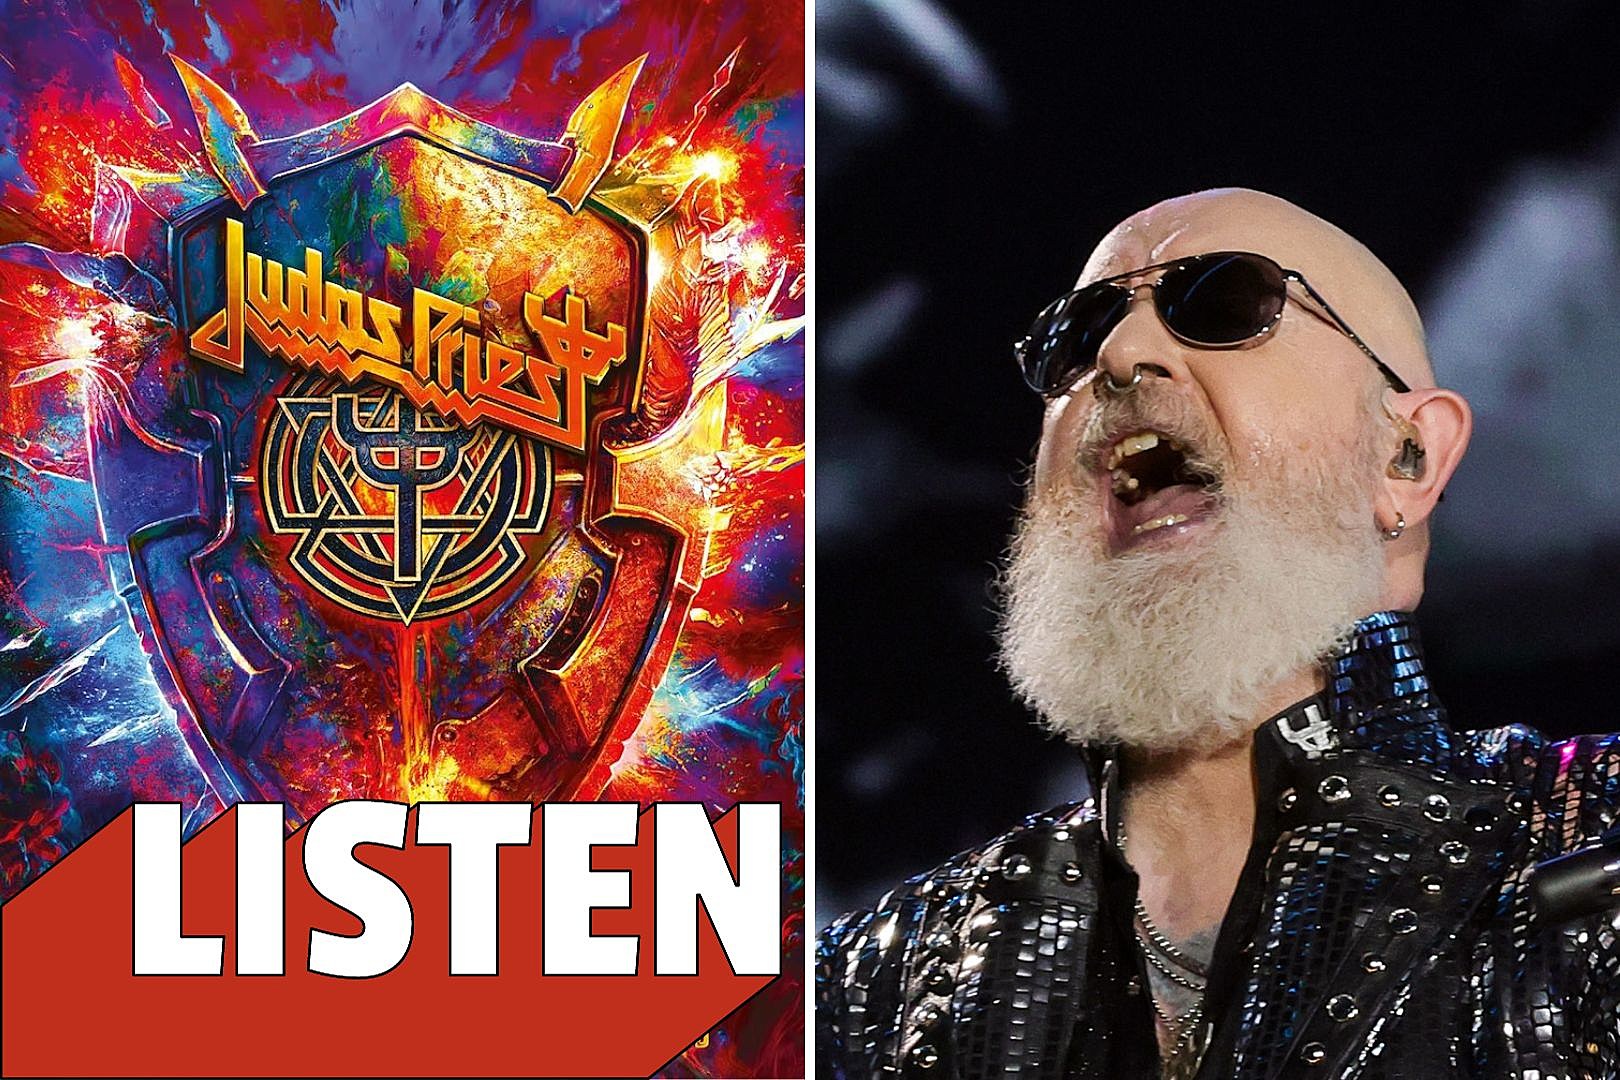 JUDAS PRIEST RELEASES NEW SINGLE FROM UPCOMING ALBUM - WRSR-FM